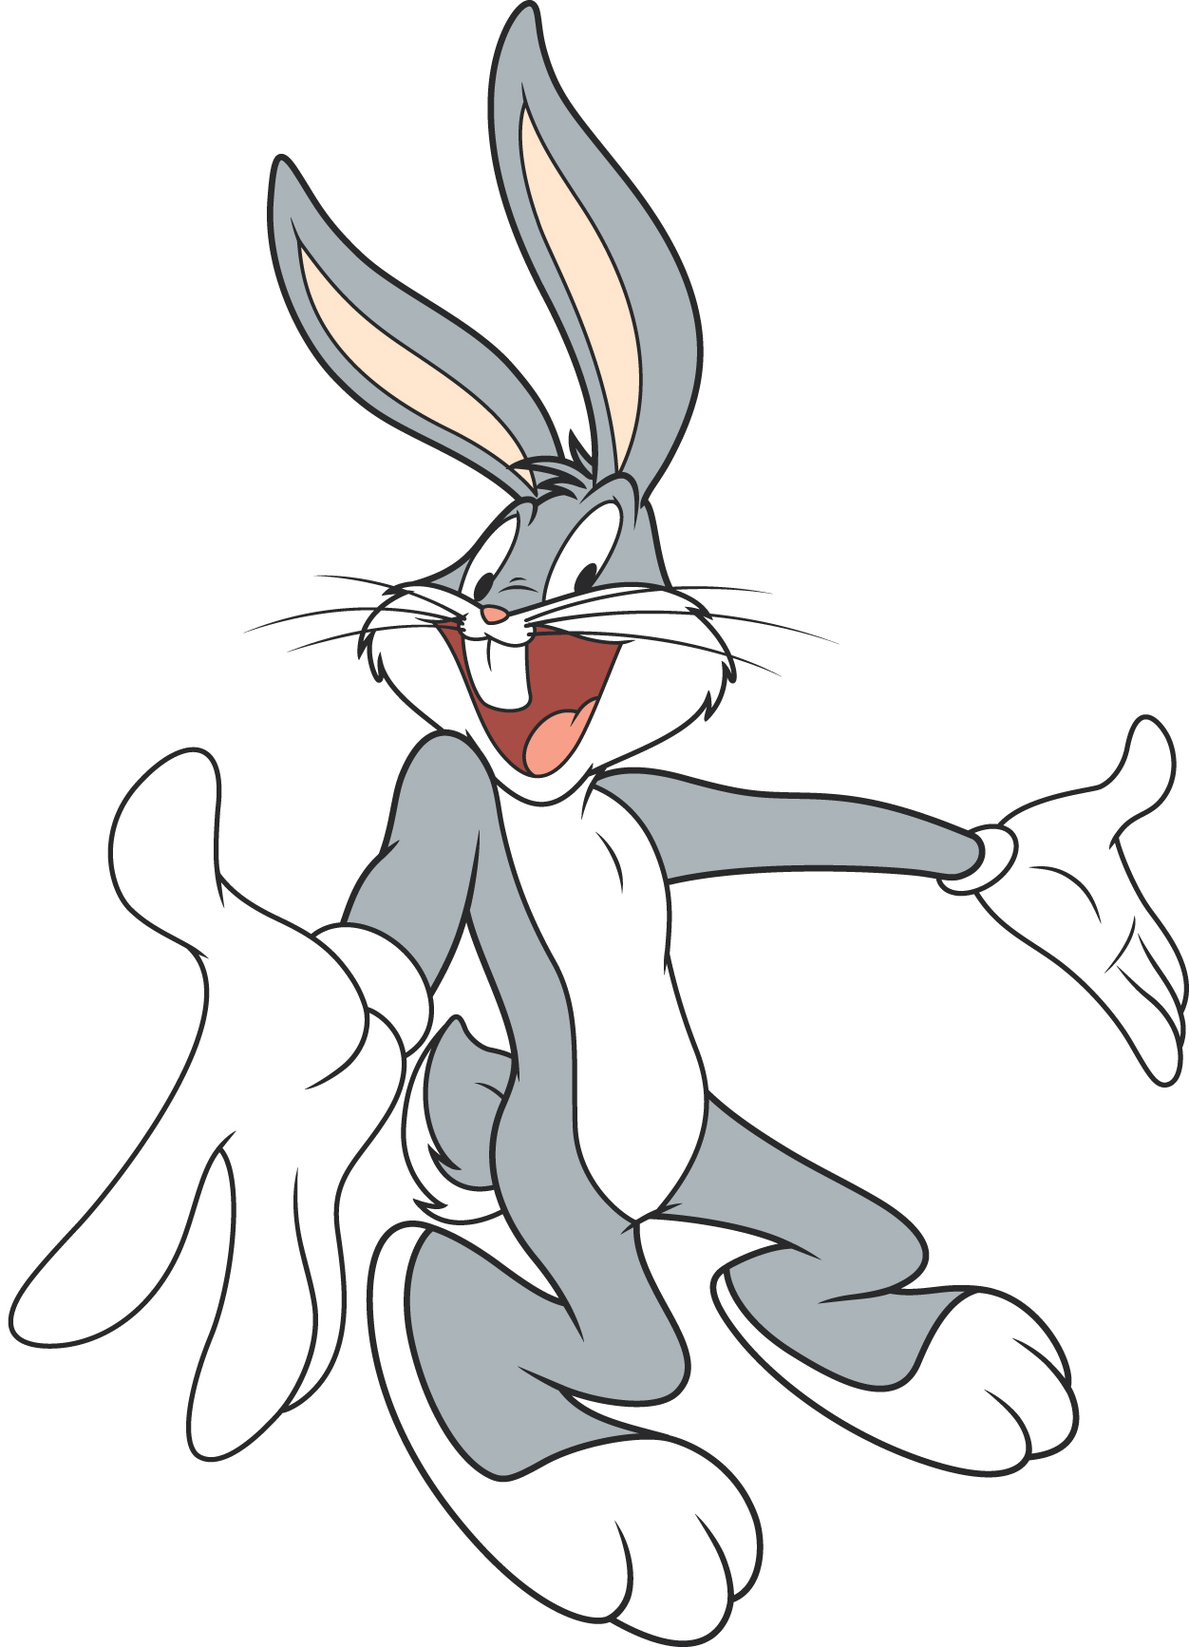 Bugs Bunny Fictional Characters Wiki Clipart - Free to use Clip ...